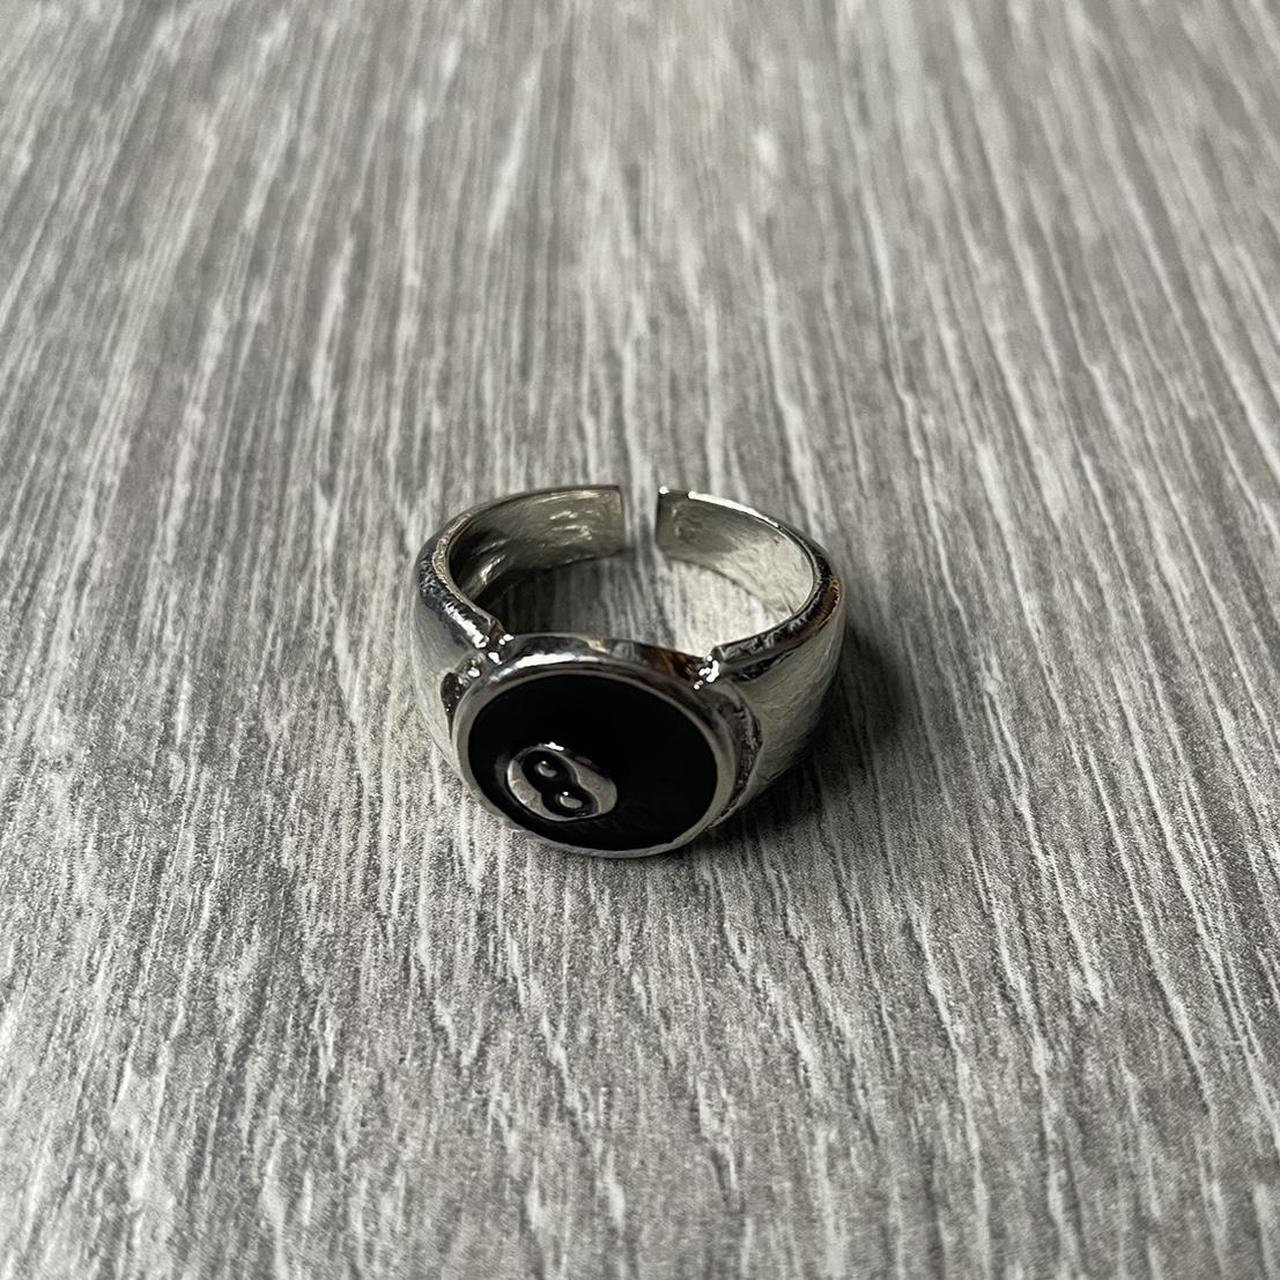 8 ball ring with adjustable sizing🎱 #jewelry... - Depop